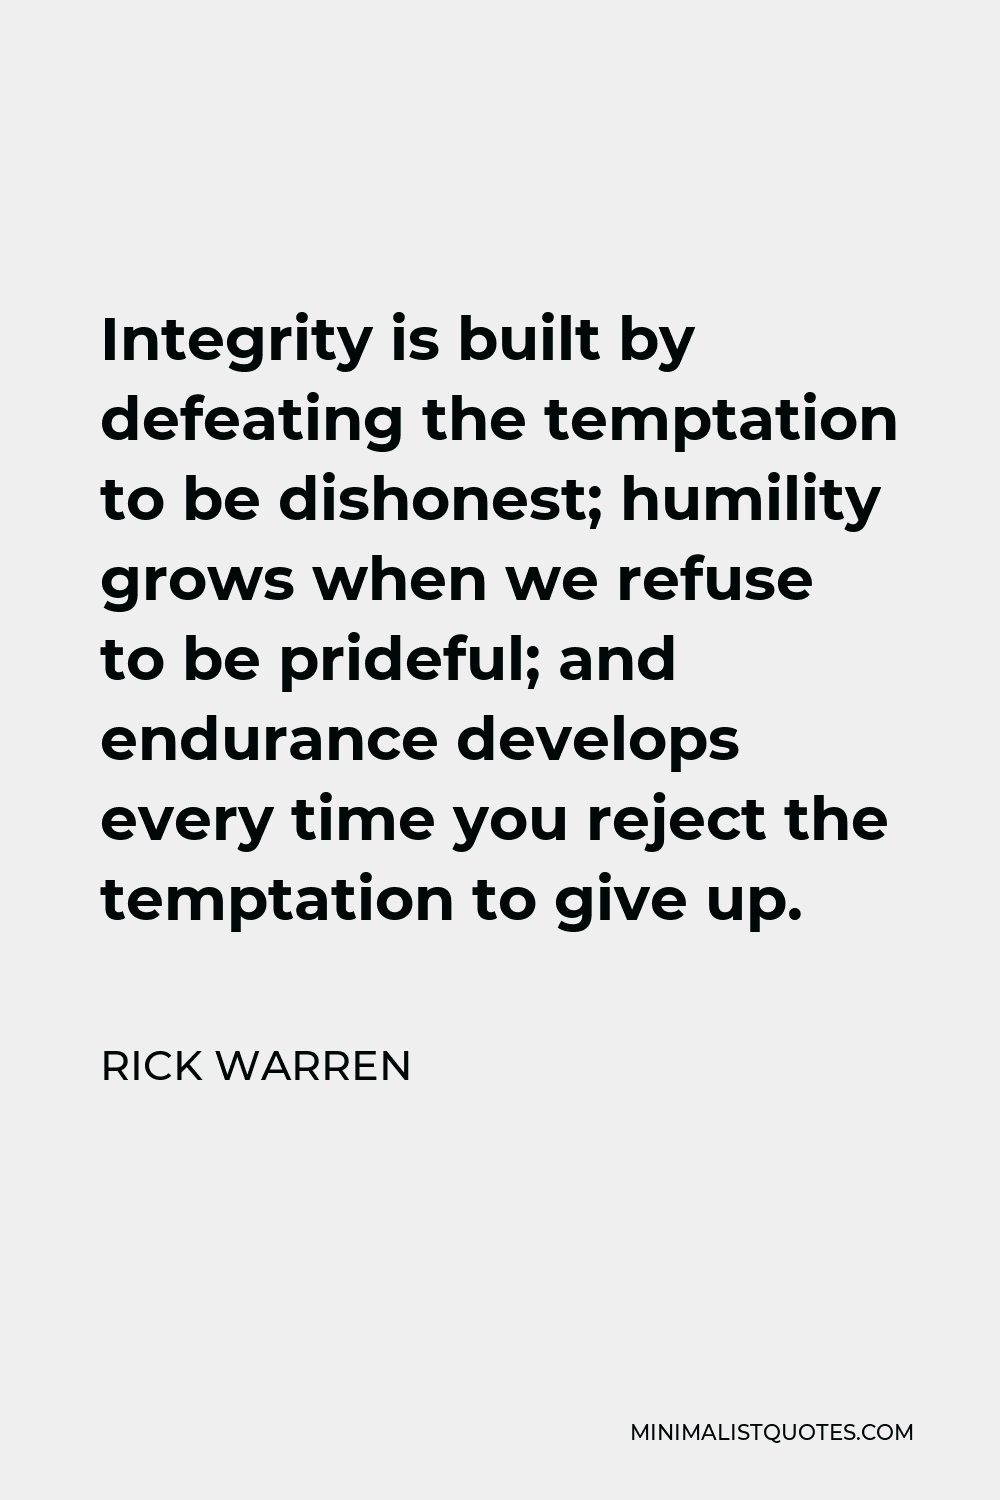 Rick Warren Quote - Integrity is built by defeating the temptation to be dishonest; humility grows when we refuse to be prideful; and endurance develops every time you reject the temptation to give up.